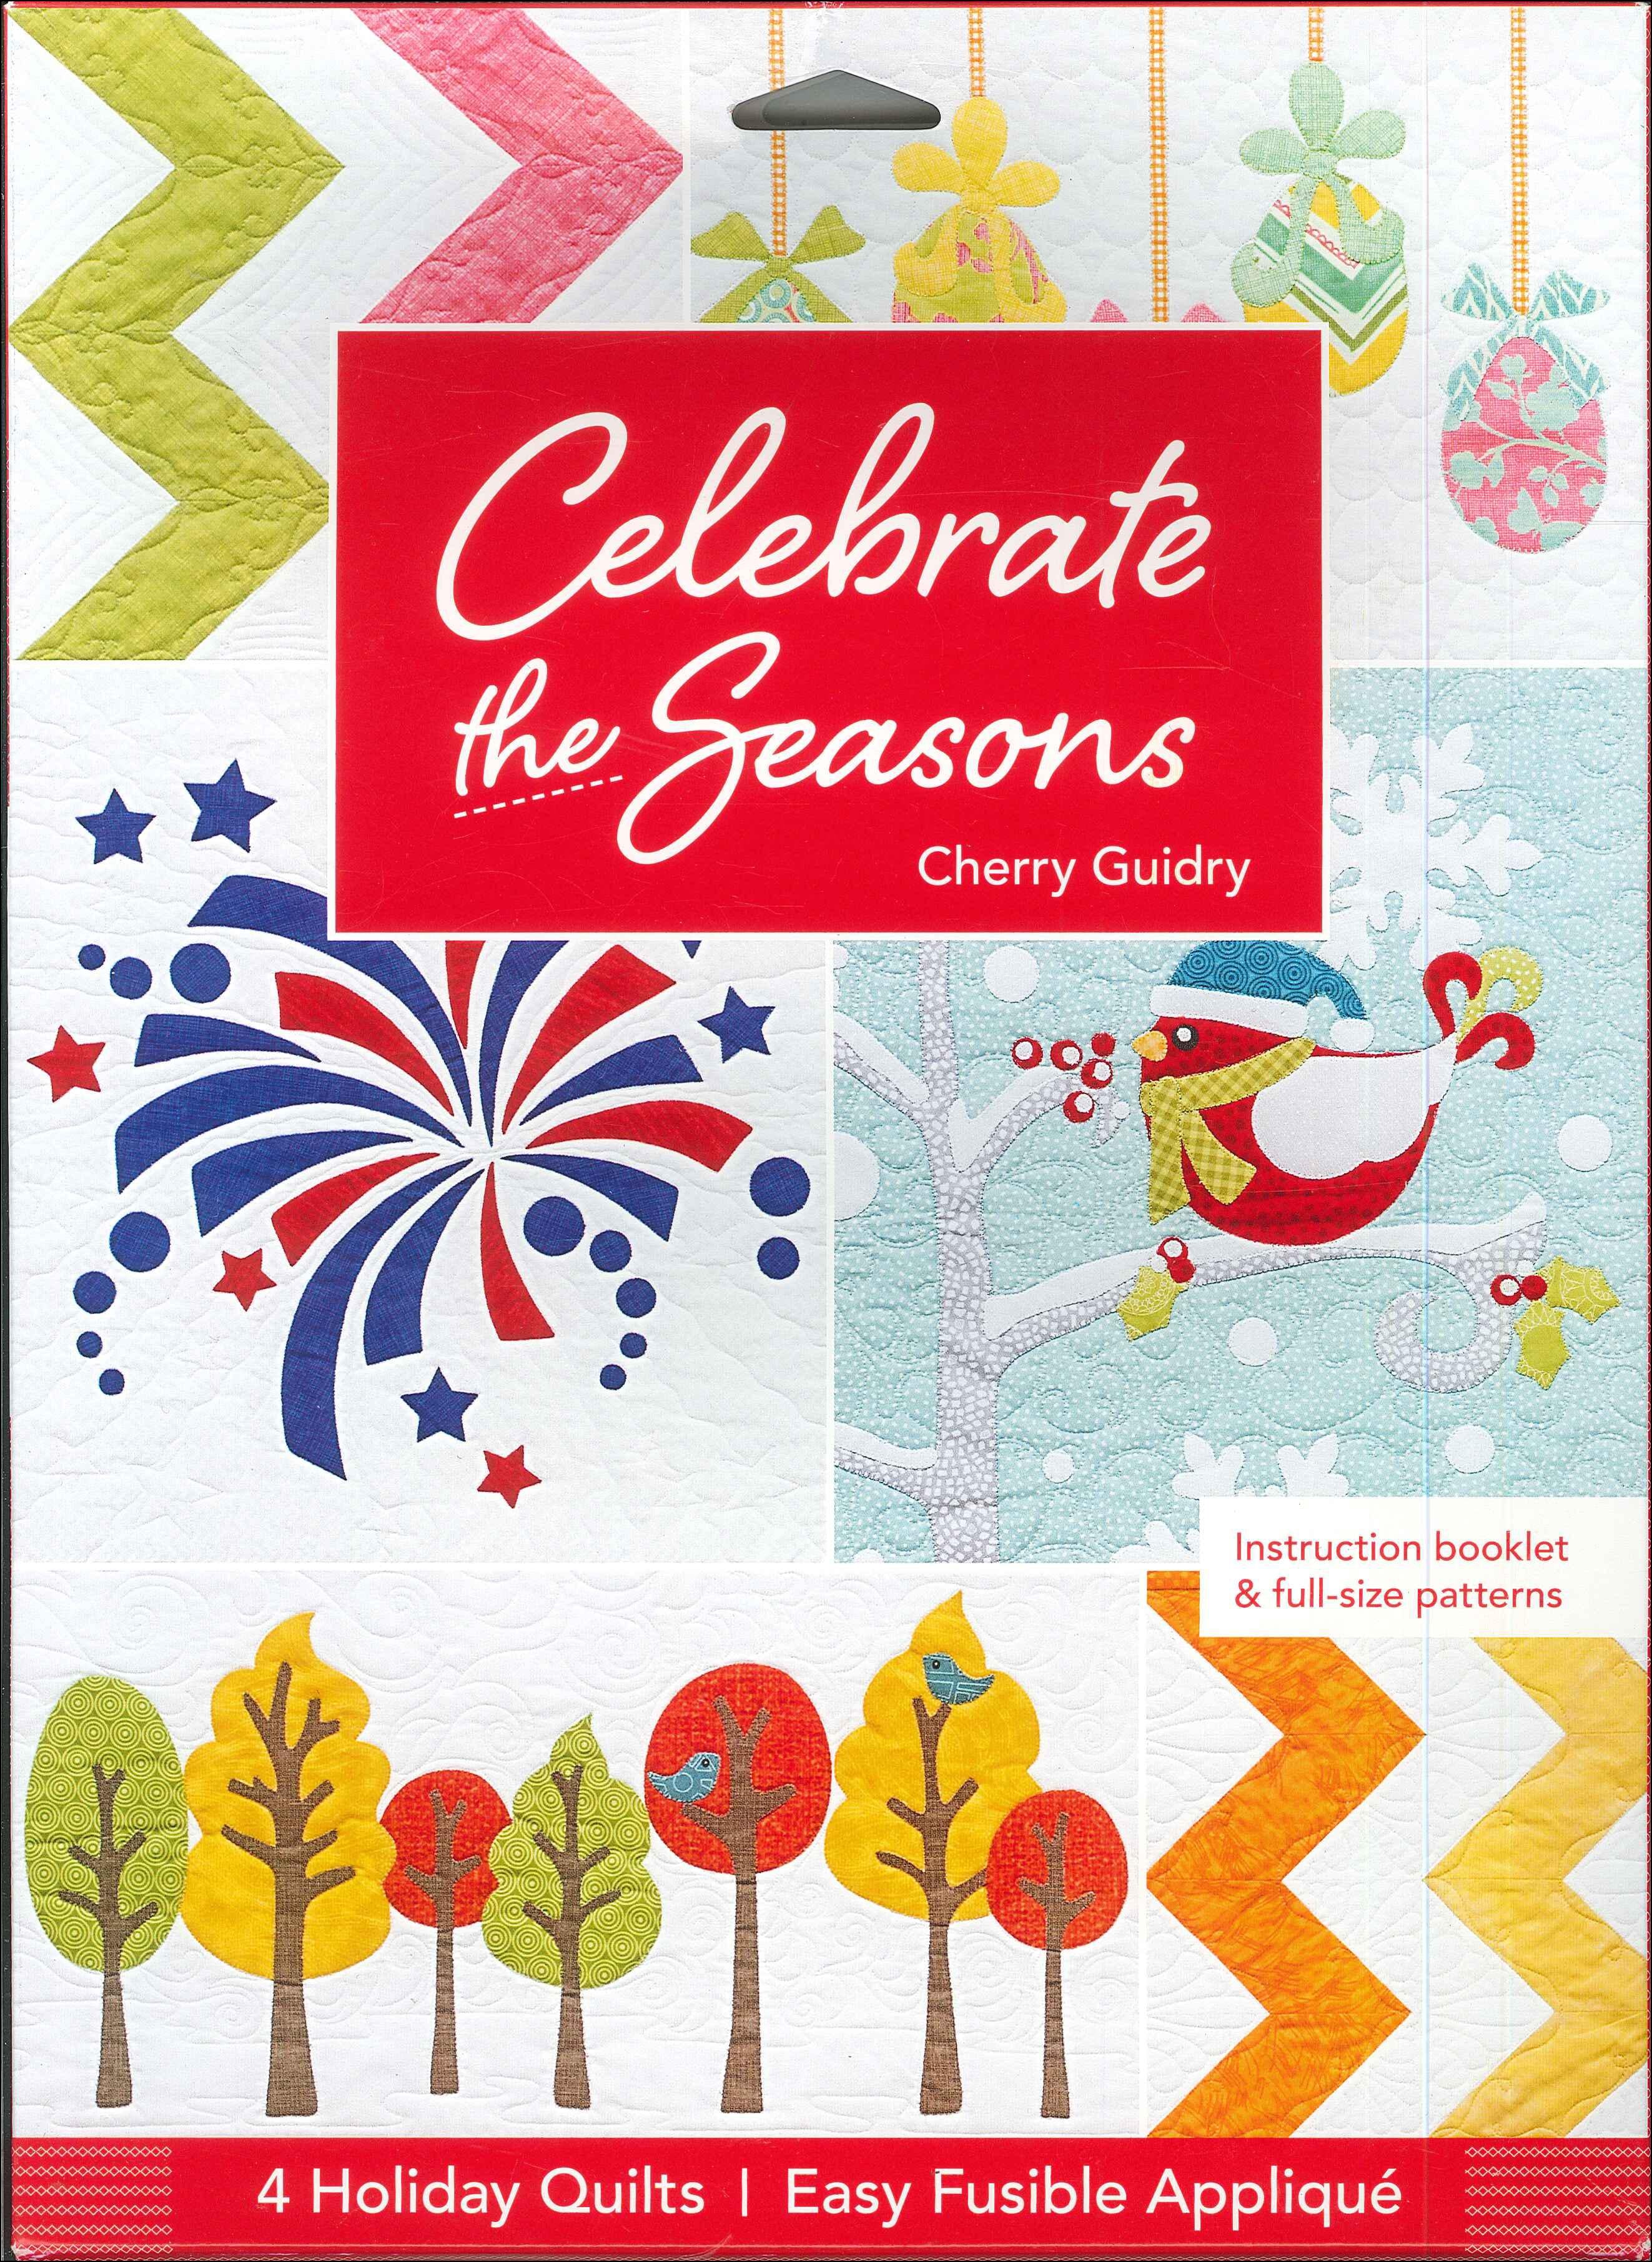 Celebrate The Seasons 4 Holiday Quilts Fusible Applique Booklet and Patterns by Cherry Guidry for C&T Publishing